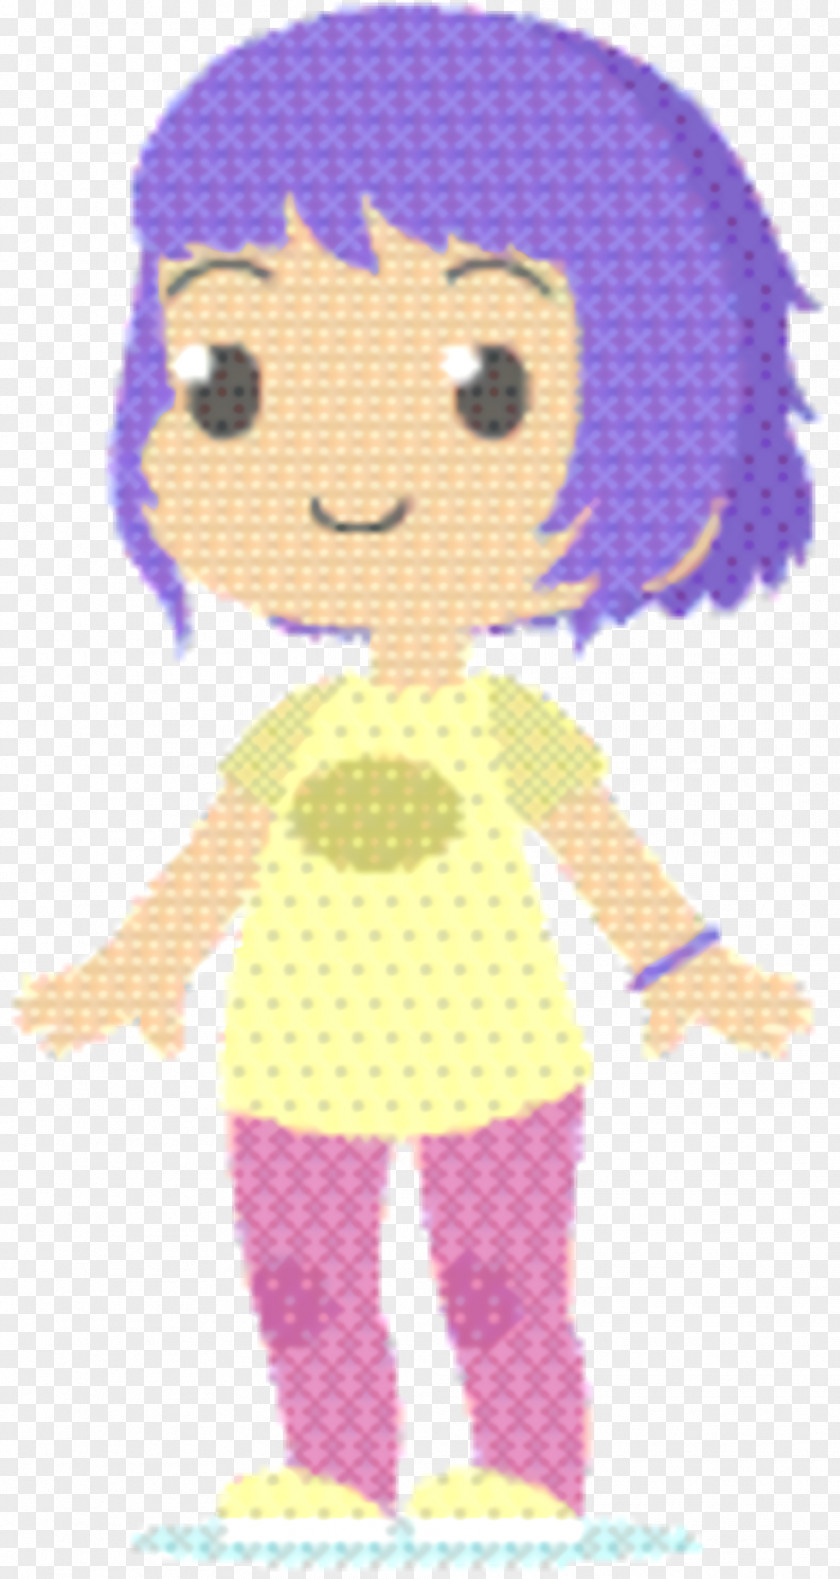 Toy Cartoon Textile PNG